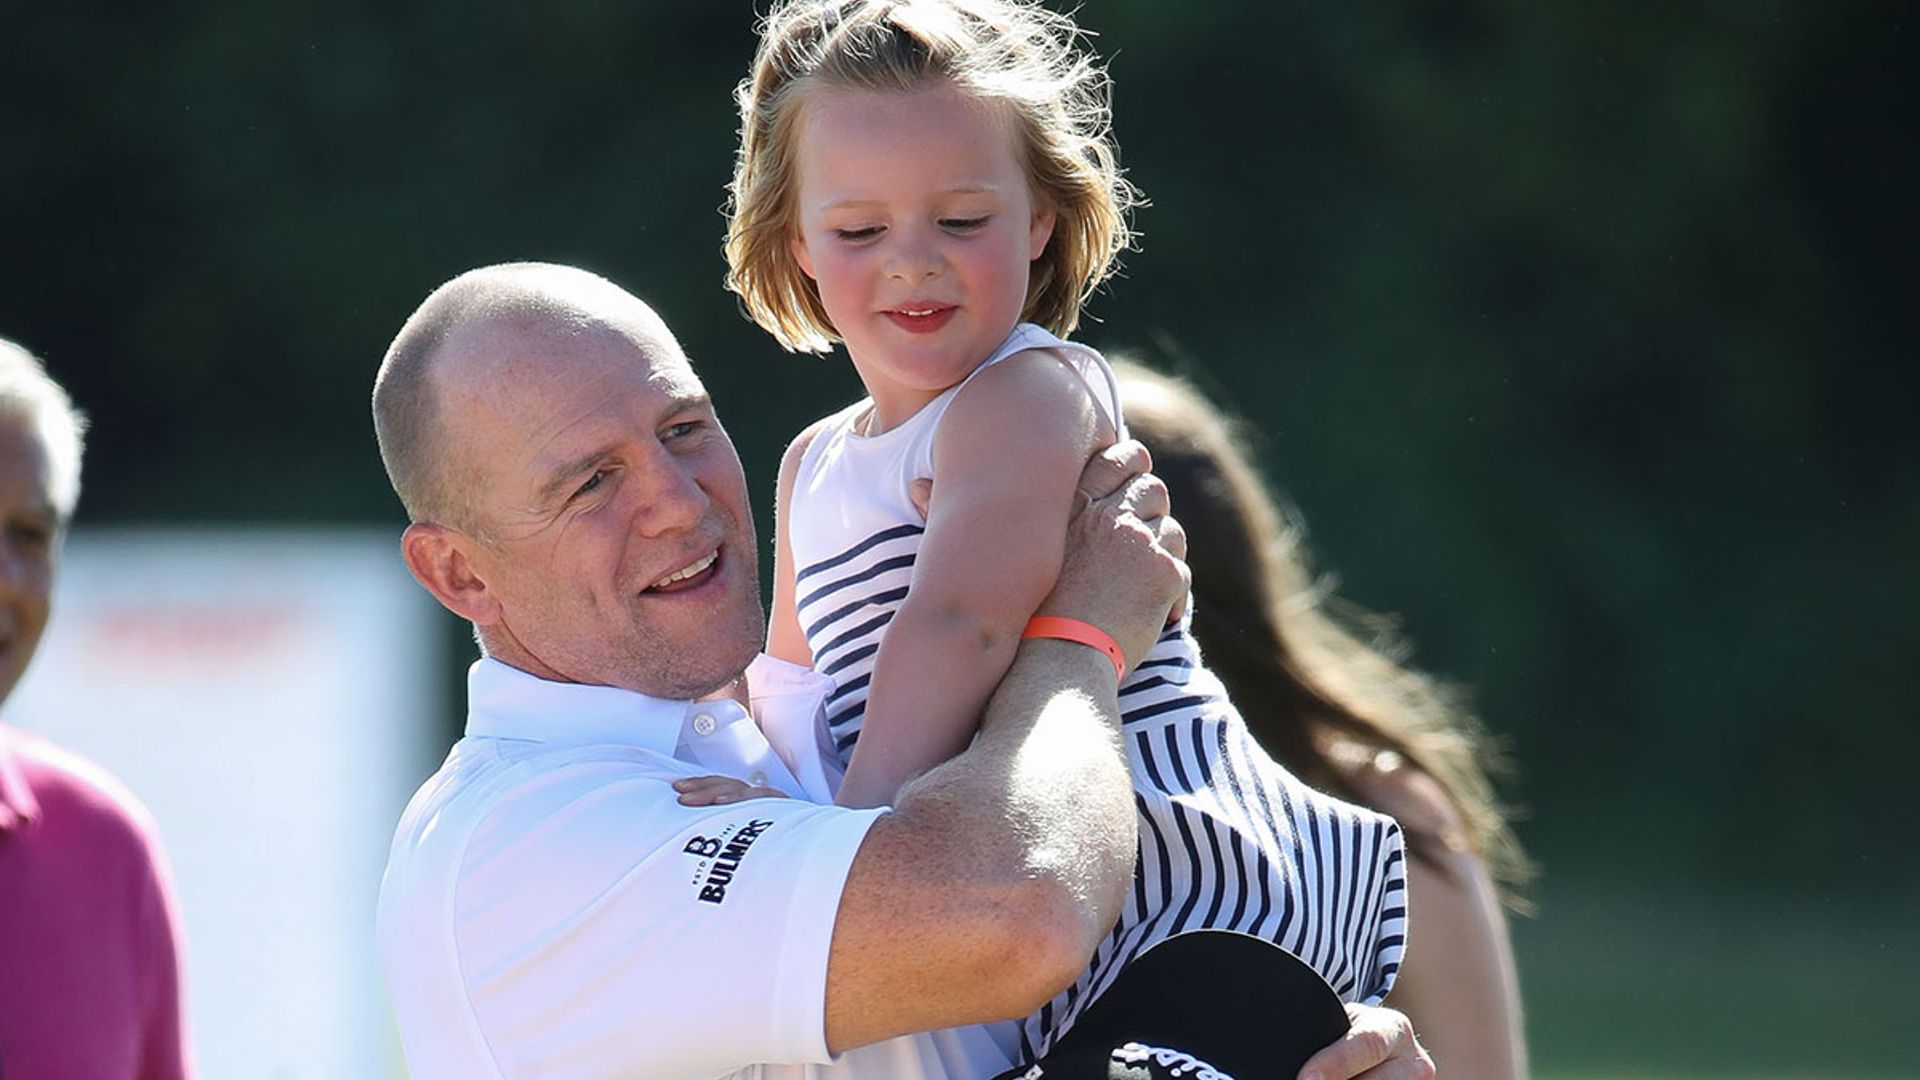 Mike Tindall's pre-birthday outing with daughter Mia revealed